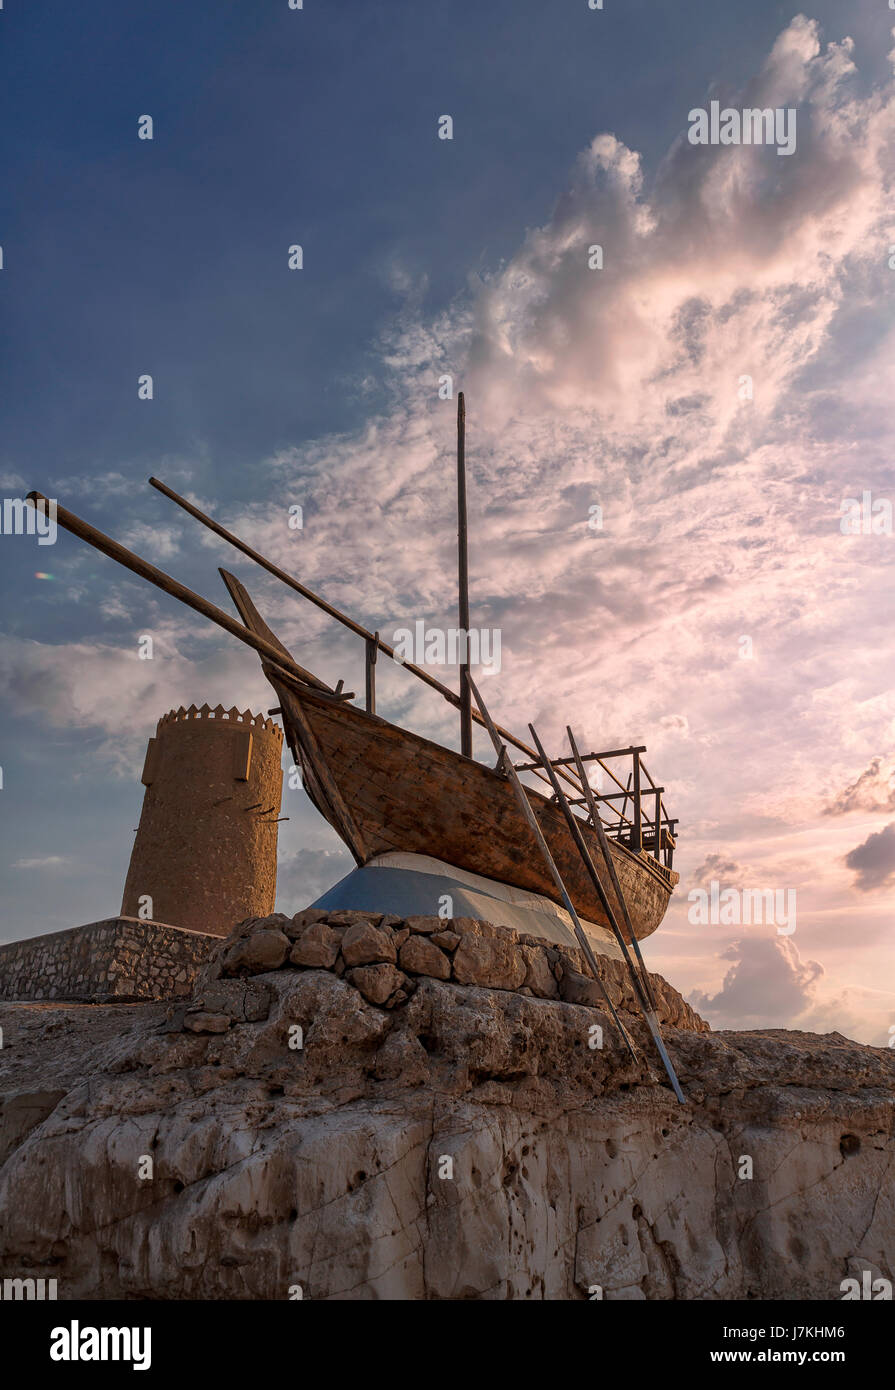 Monument of Dhow boat next to tower along the Al Khor corniche in Qatar, Middle East. Stock Photo